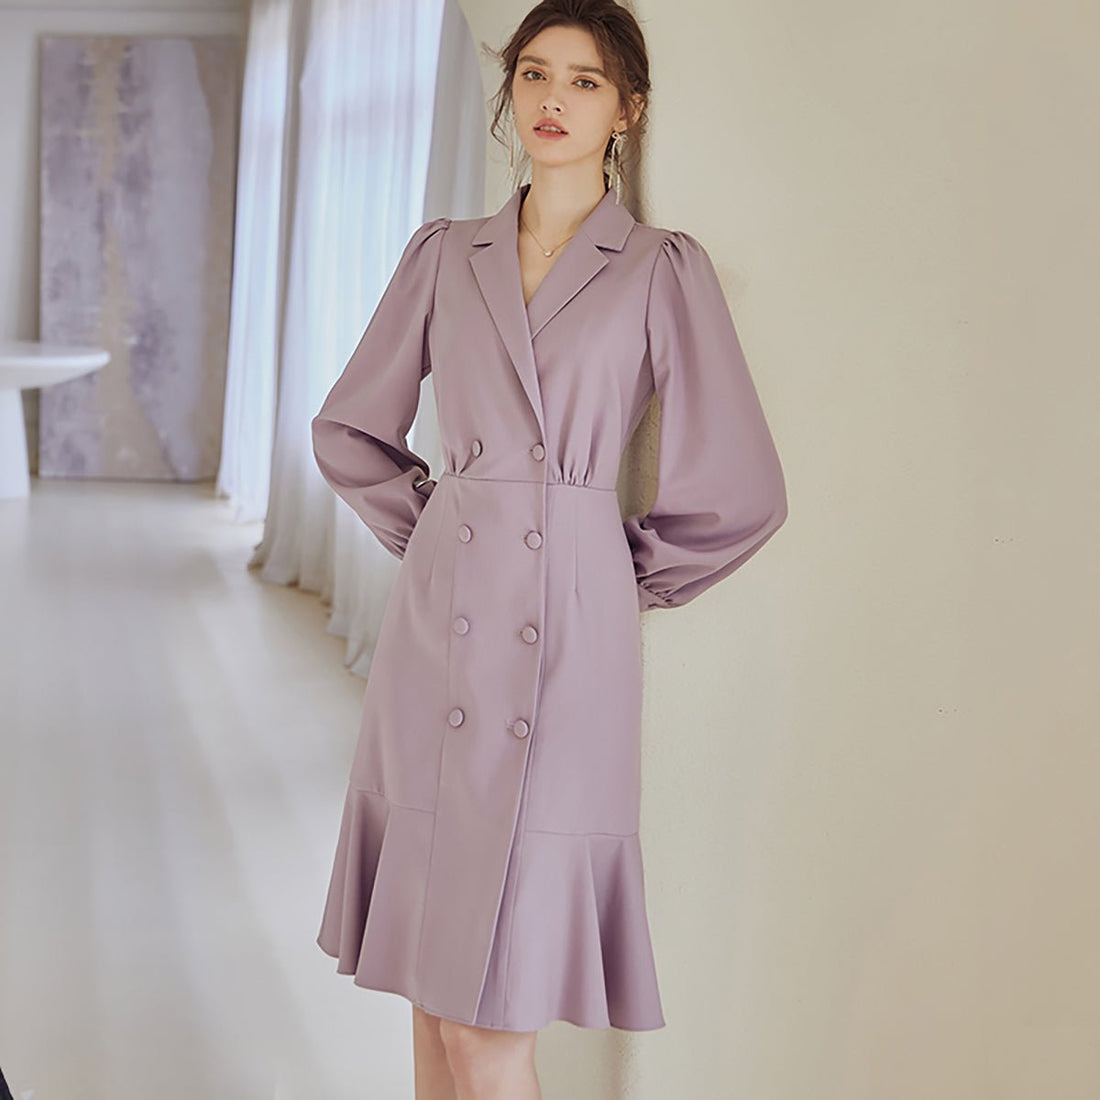 Lapel Double-Breasted Lilac Dress - 0cm